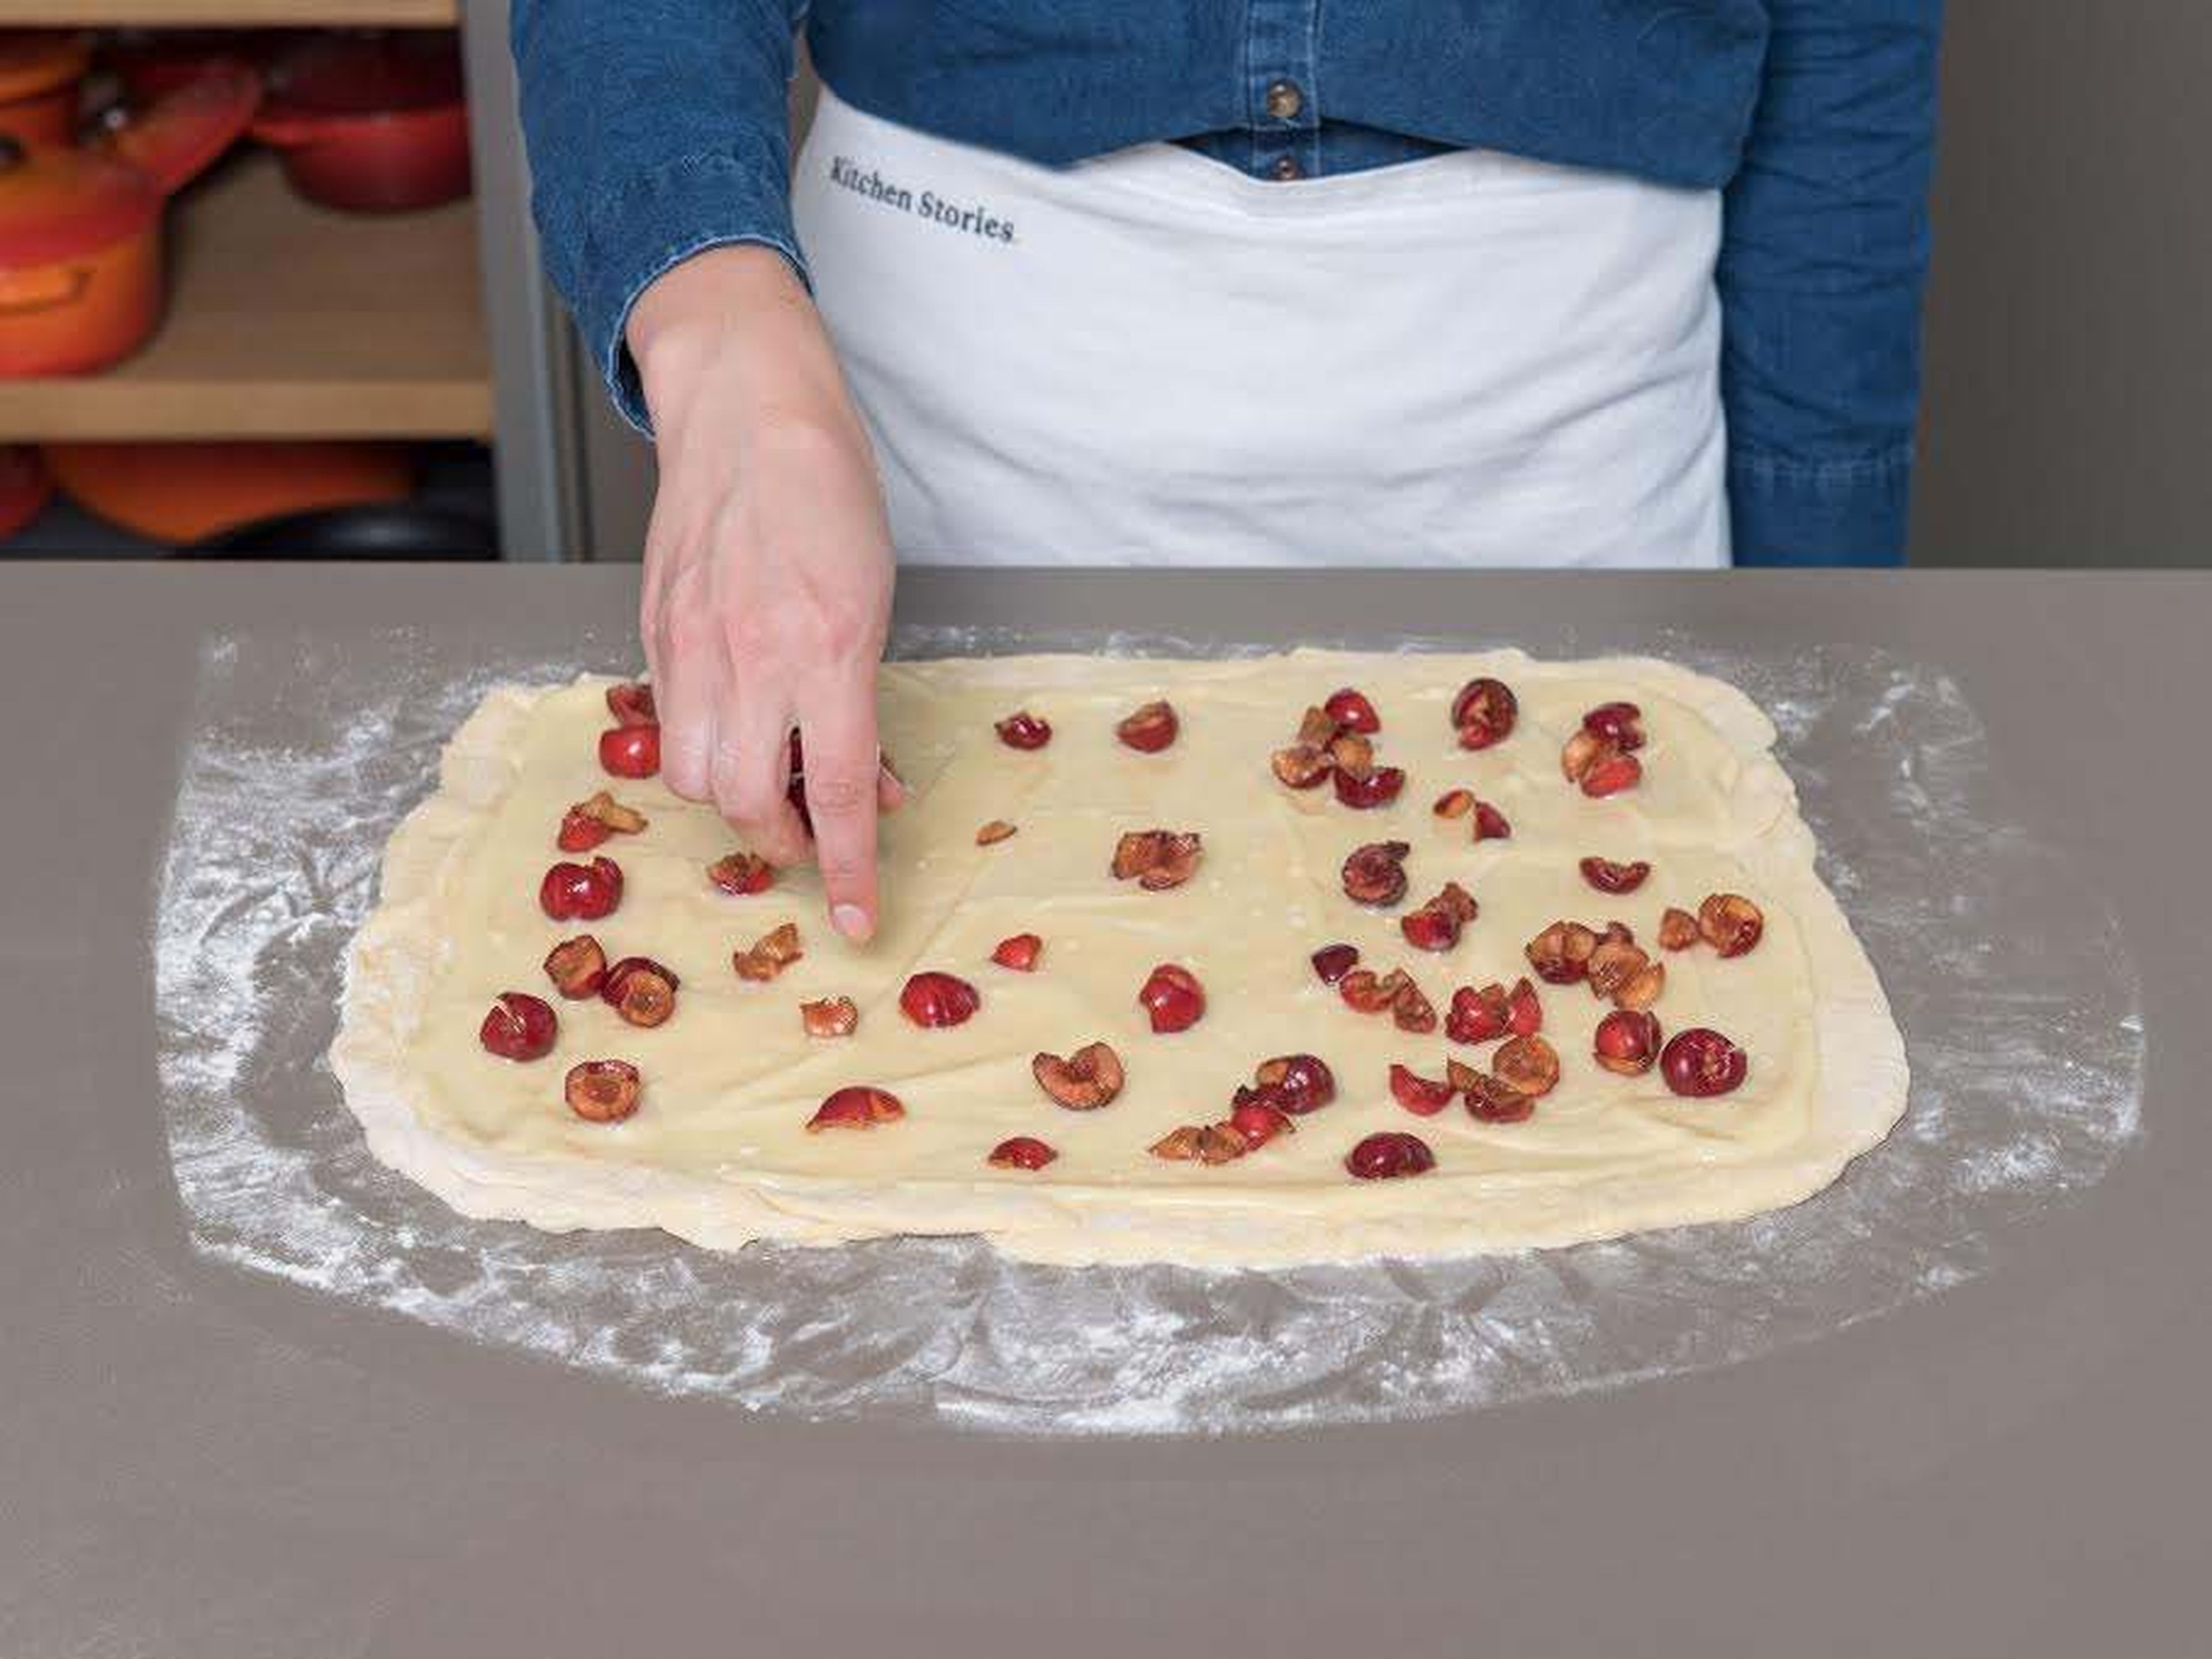 Roll out the dough on a floured surface to a rectangle of approx. 30 x 45 cm/12 x 18 in. Spread white chocolate and cream cheese mixture onto the dough, leaving a small border all around, and distribute cherries evenly on top. Then, starting at the long end, roll up the dough and cut log into 12 equally sized pieces with a sharp knife. Place the rolls in a greased baking dish, cover, and leave to rise for approx. 30 - 45 min. Preheat oven to 175°C/350°F.